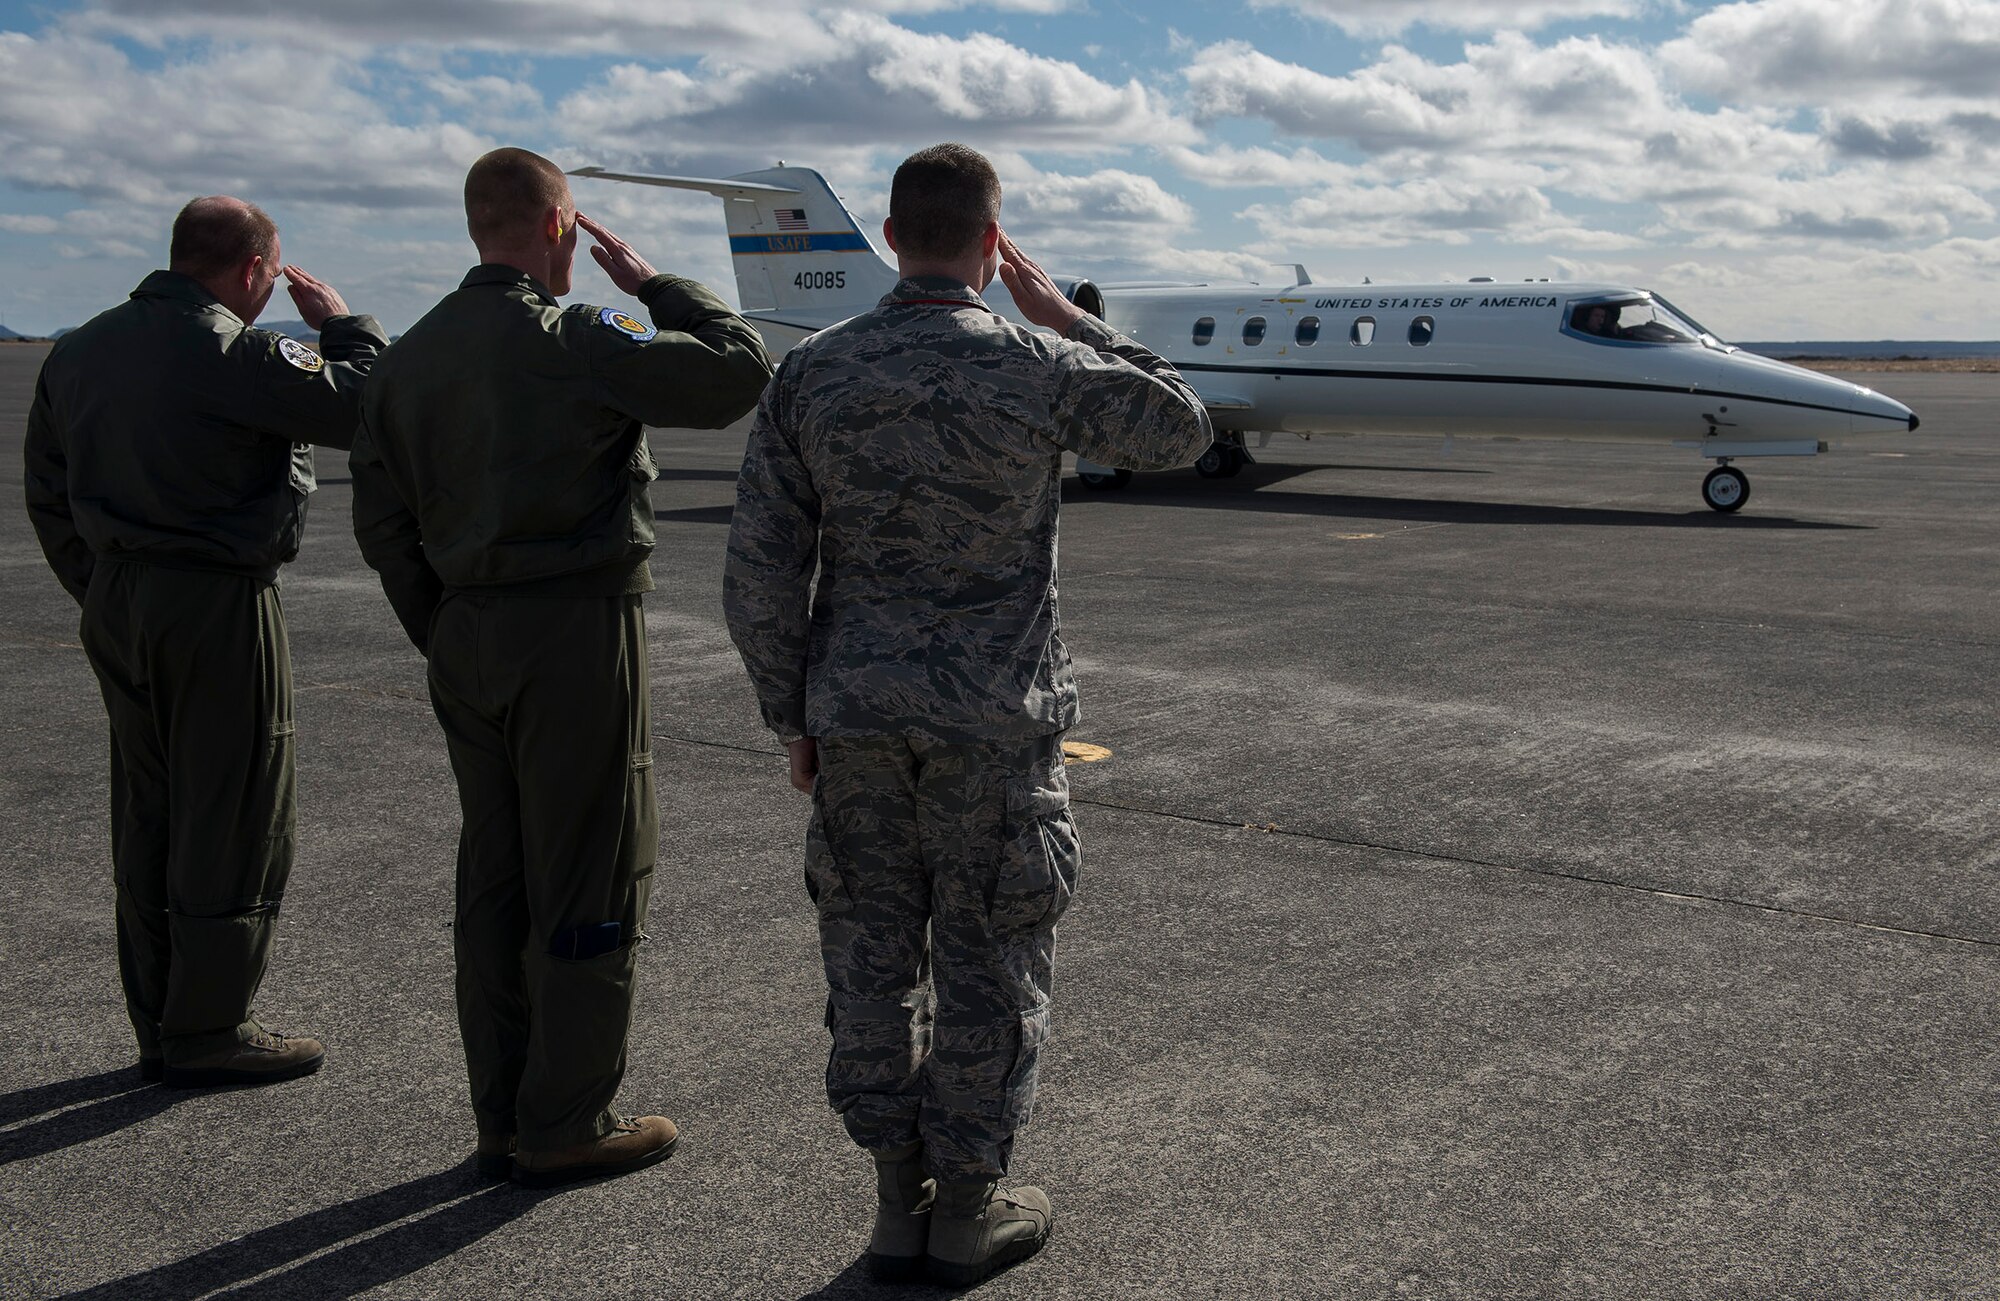 Leaders from the 871st Air Expeditionary Squadron salute a plane carrying U.S. Air Force Lt. Gen. Darryl Roberson, 3rd AF commander, U.S. Air Force Chief Master Sgt. Kaleth Wright, 3rd Air Force command chief, U.S. Air Force Col. Robert Navotny, 48th Fighter Wing commander, and U.S. Air Force Col. Kenneth Bibb, Jr., 100th Air Refueling Wing commander, as it departs Keflavik International Airport, Iceland, after visiting deployed members supporting the Icelandic Air Surveillance and Policing mission April 23, 2015. The IAS mission, an ongoing NATO commitment to maintain the security of Iceland’s airspace, is supported on a rotational basis by fighter aircraft units throughout NATO nations. (U.S. Air Force photo by Staff Sgt. Chad Warren/Released)